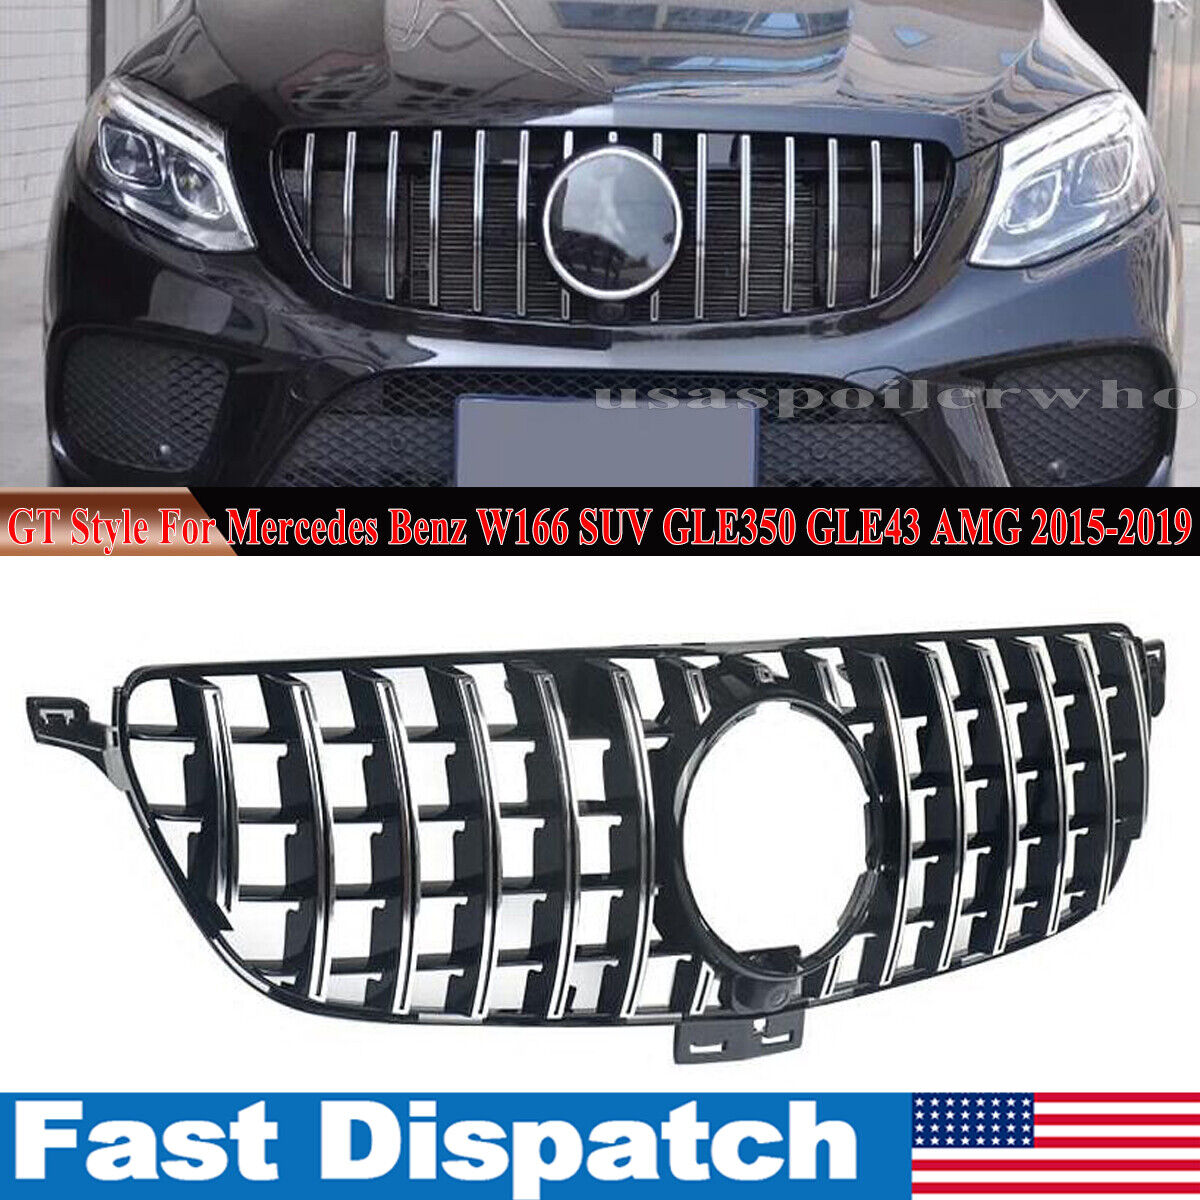 GT Front Grille For Mercedes Benz W166 GLE350 GLE400 GLE43 2016-19 Chrome Black